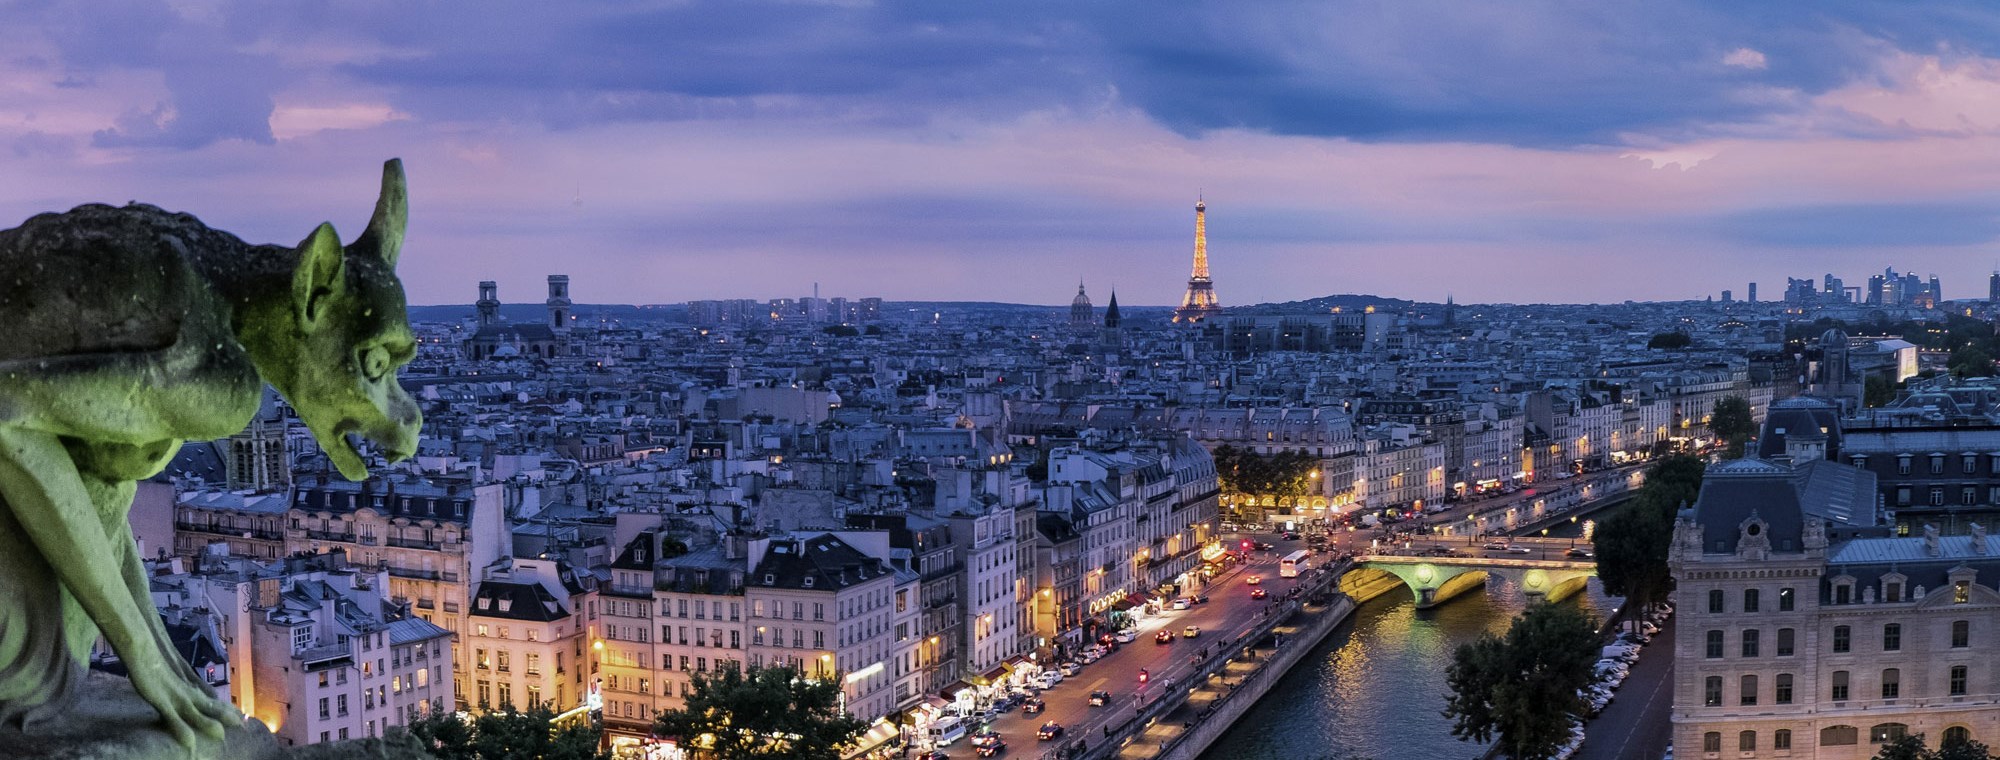 Our Europe tours offer panoramic views of Paris, France